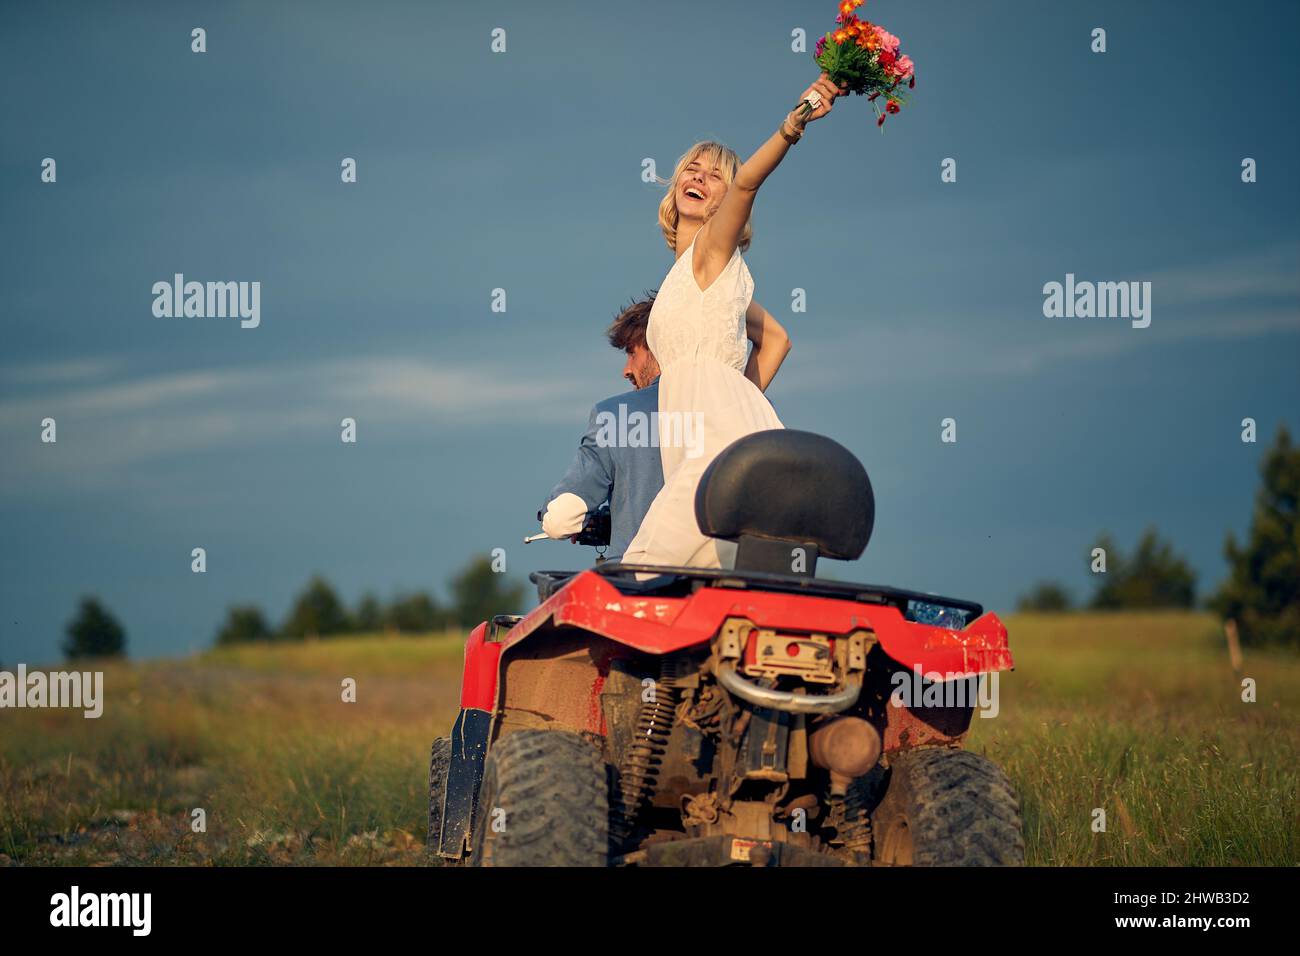 Happy bride throwing bouquet into air. Joyful newlywed couple riding quad. Love, marriage, wedding, happiness, couple concept. Stock Photo